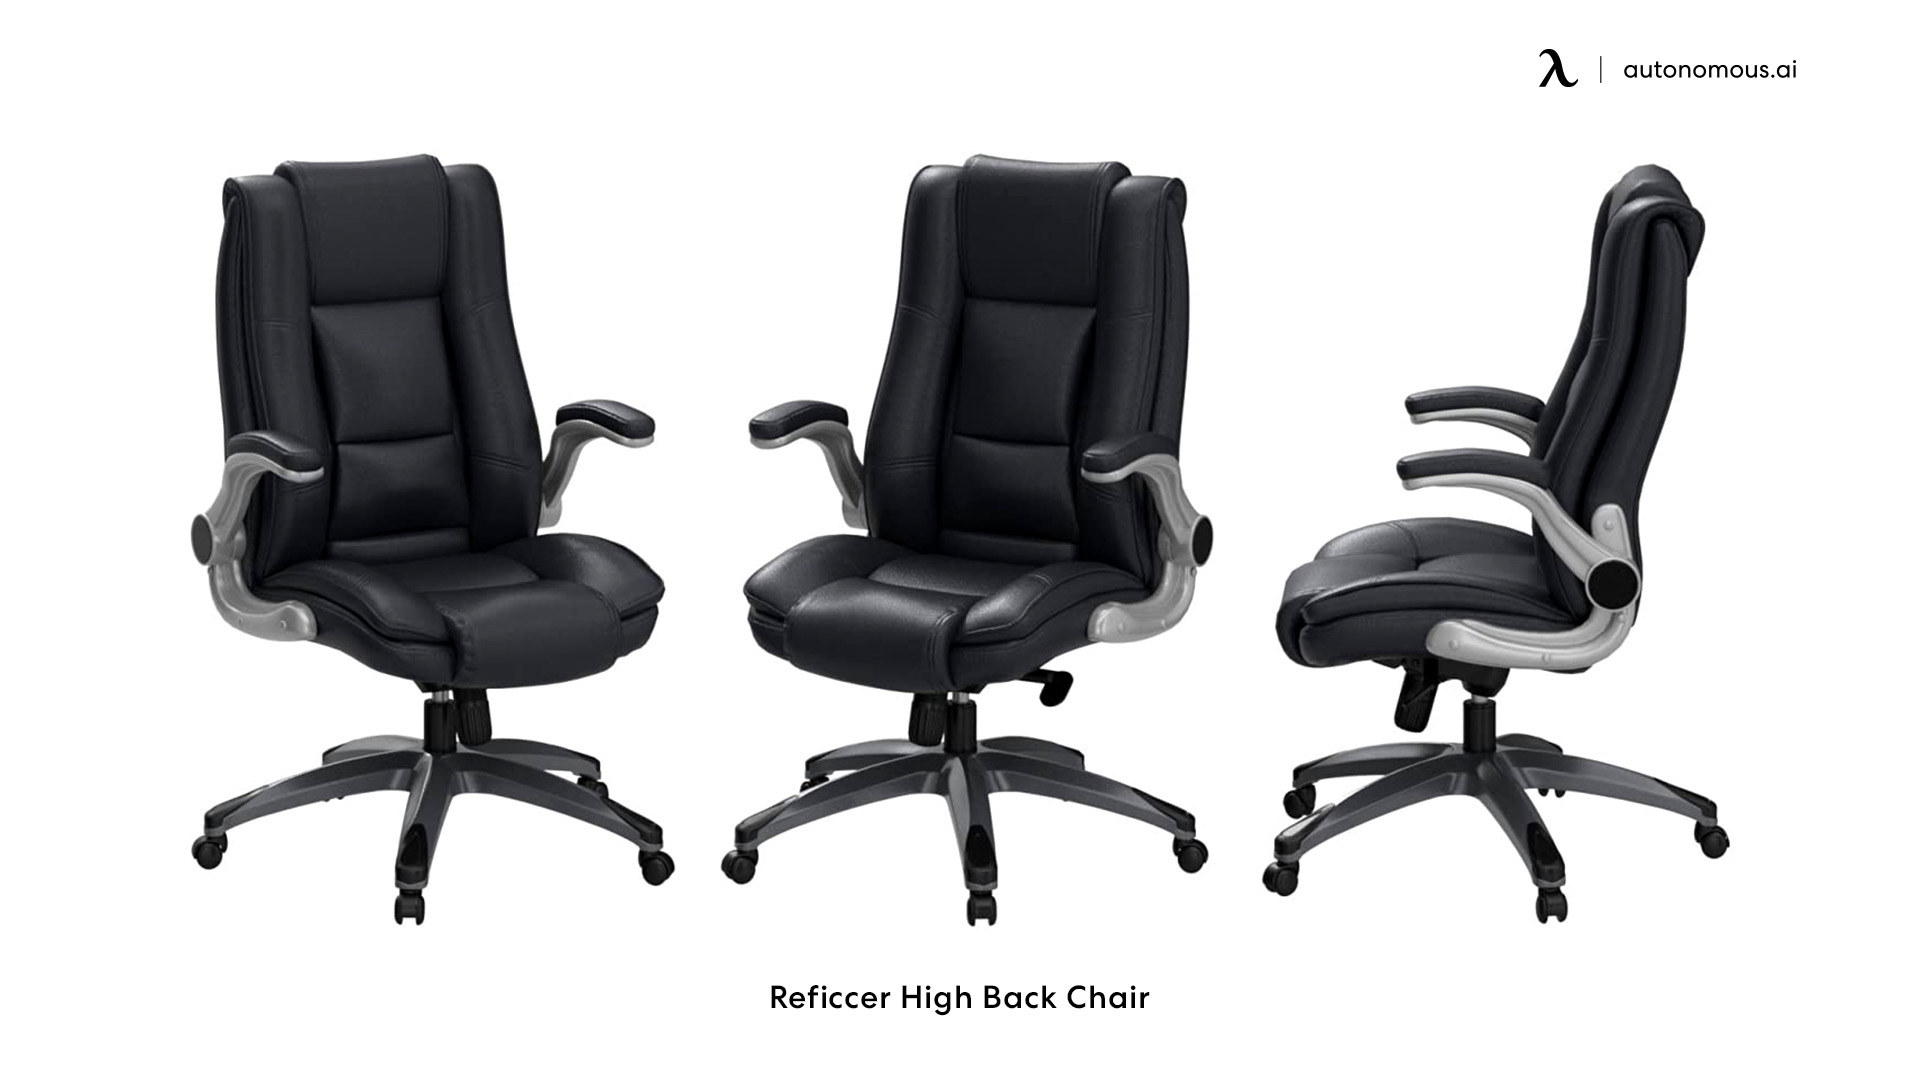 Reficcer office chair for 300 lbs